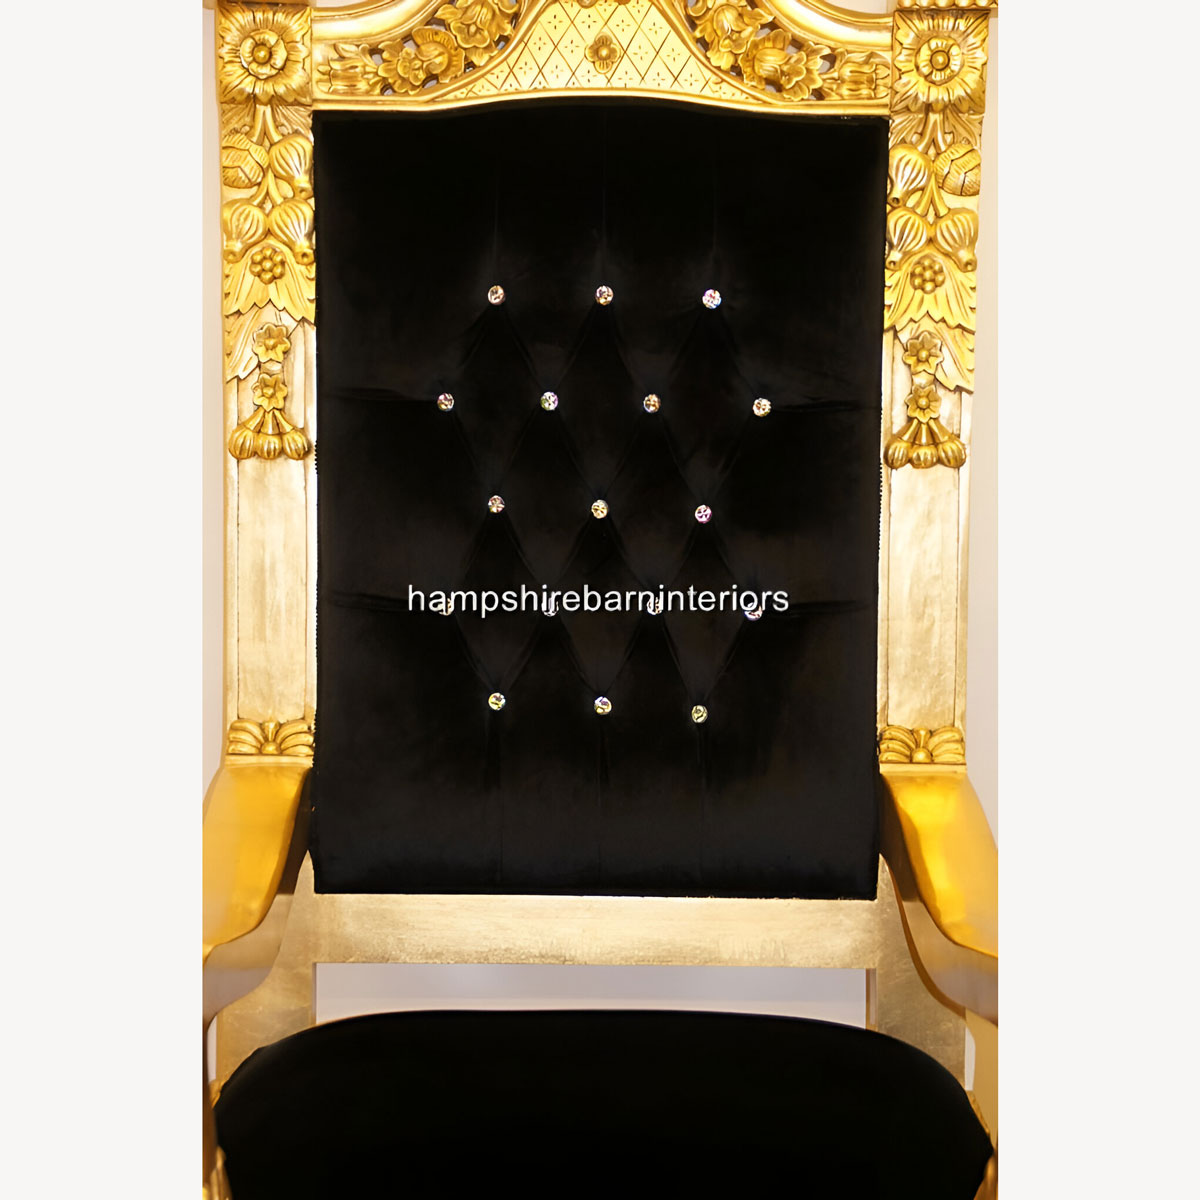 Queens Throne Chair Gold Leaf Black Velvet And Diamond Crystal Buttons 3 - Hampshire Barn Interiors - Queens Throne Chair Gold Leaf, Black Velvet And Diamond Crystal Buttons -